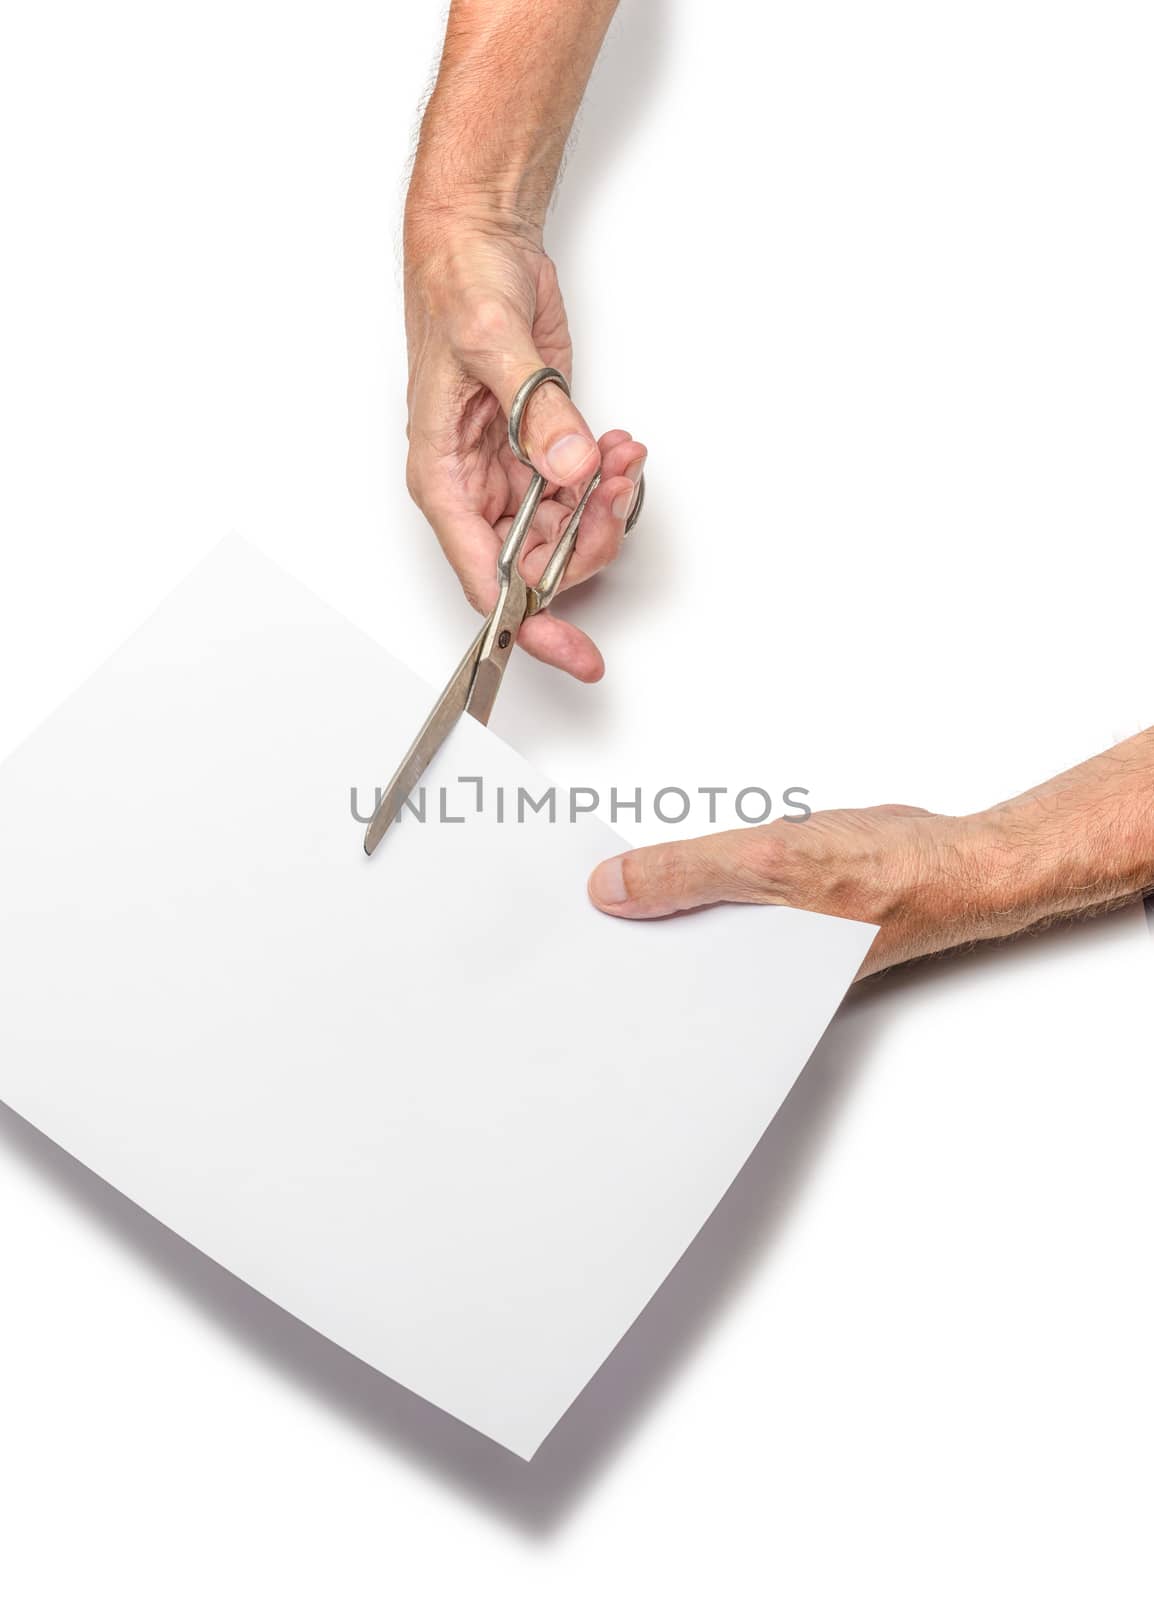 A man is cutting a sheet of white paper using  metallic scissors, on white background